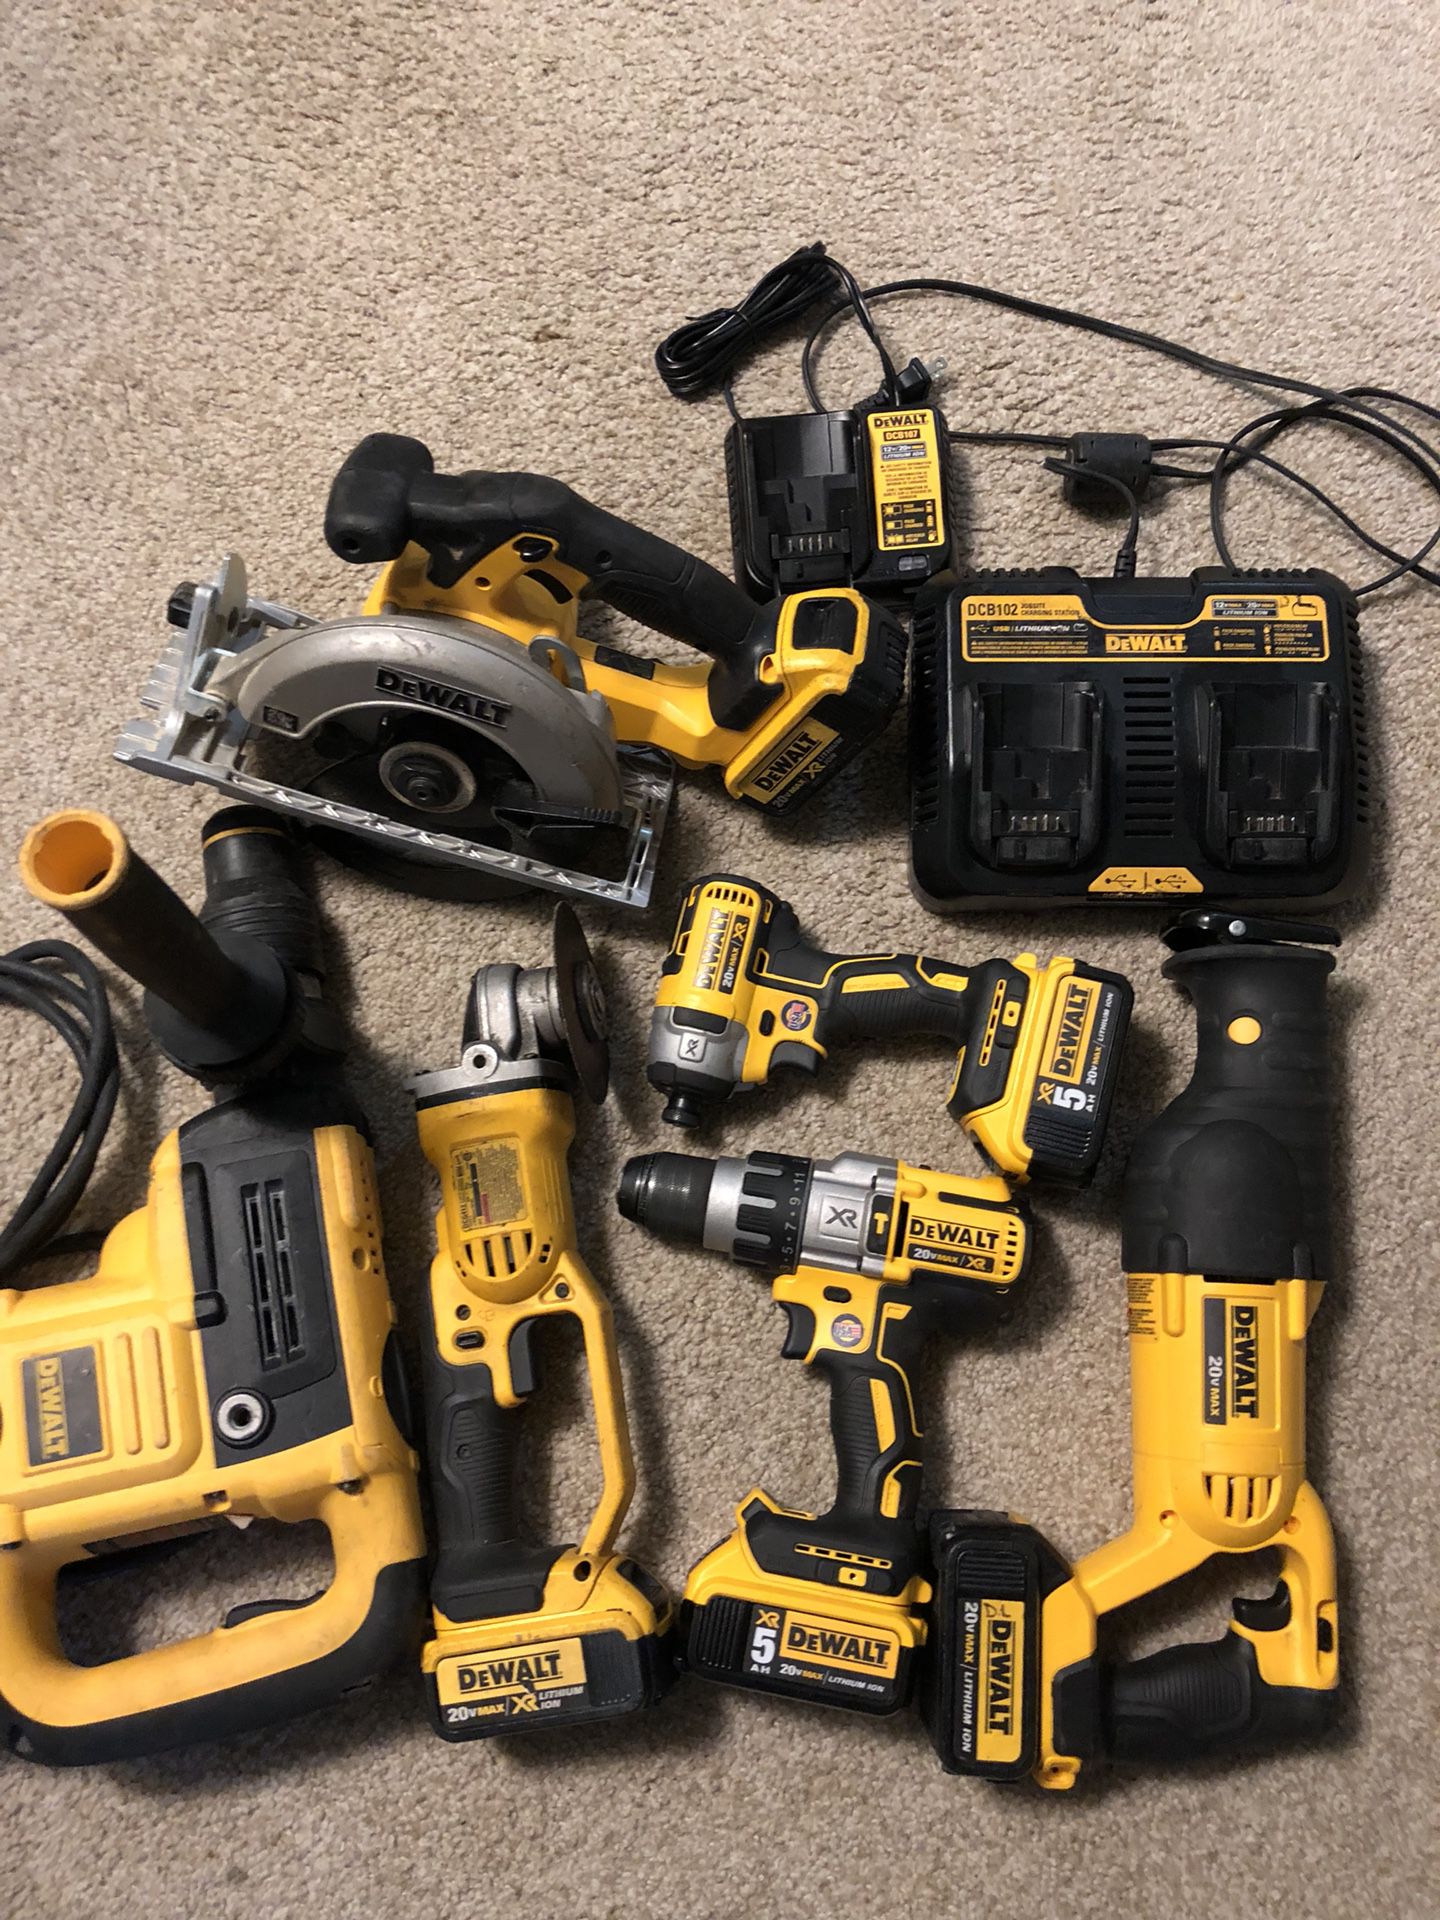 dewalt combo kit: rotary hammer drill, brushless impact , brushless hummer drill, saw zall , circular wood saw , grinder, double charging charger w